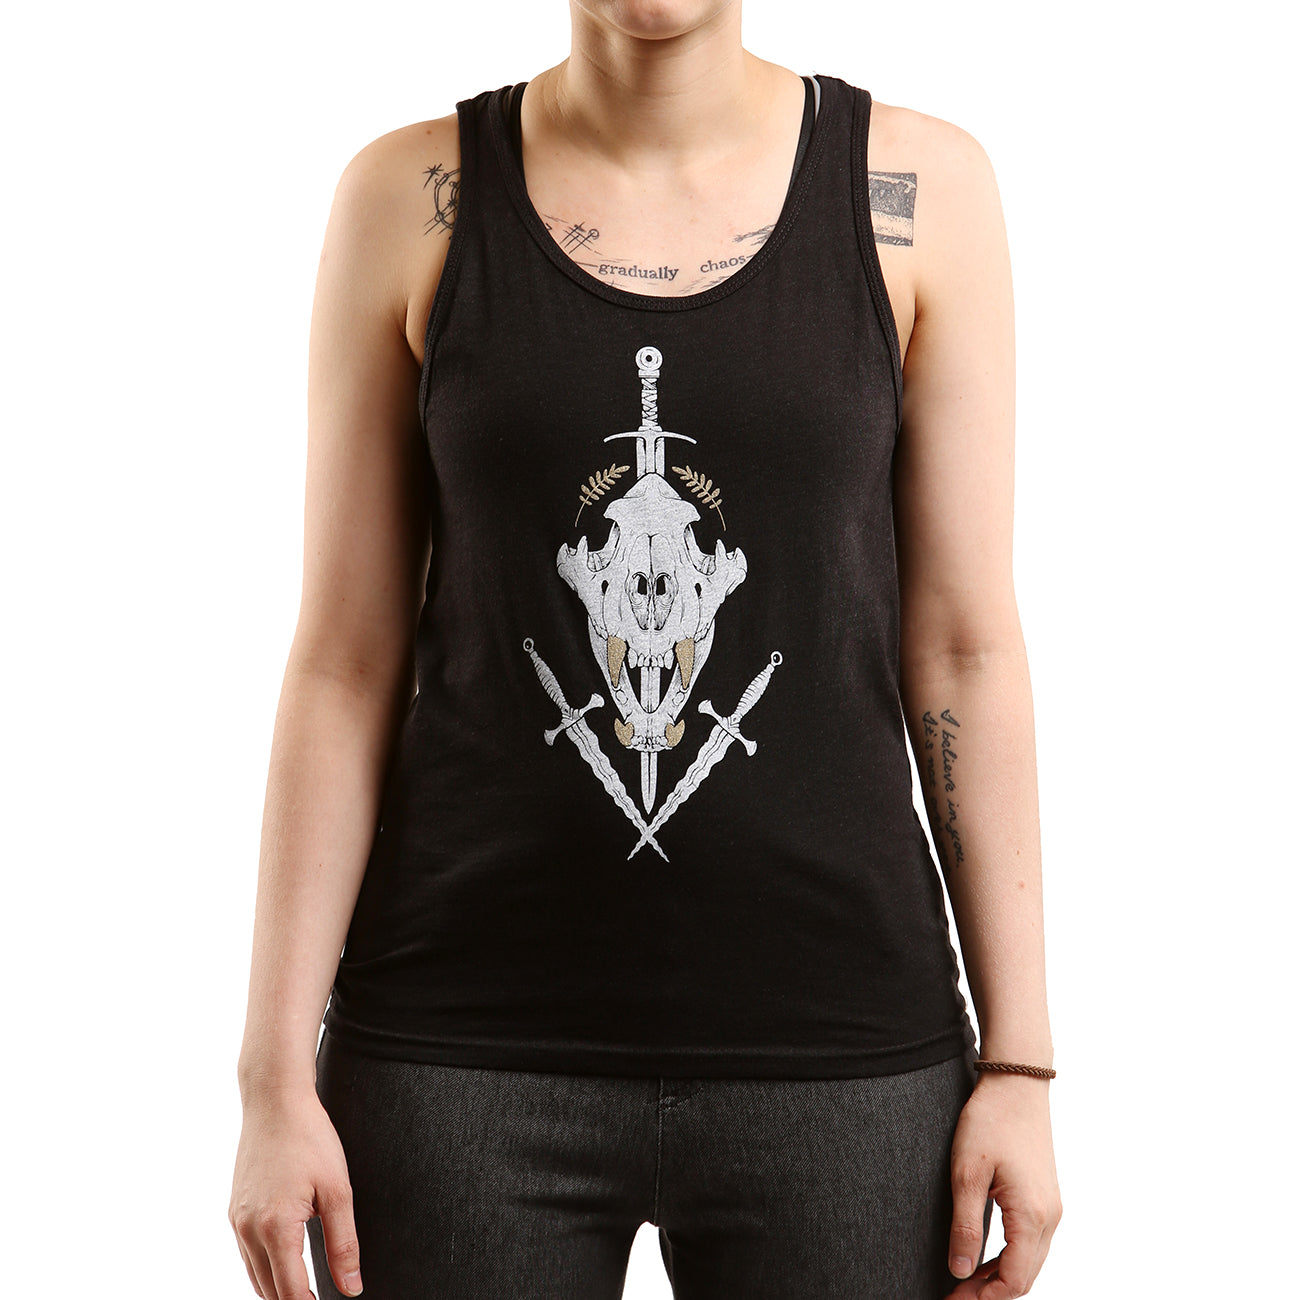 Black tank top with white tiger skull and daggers on model.